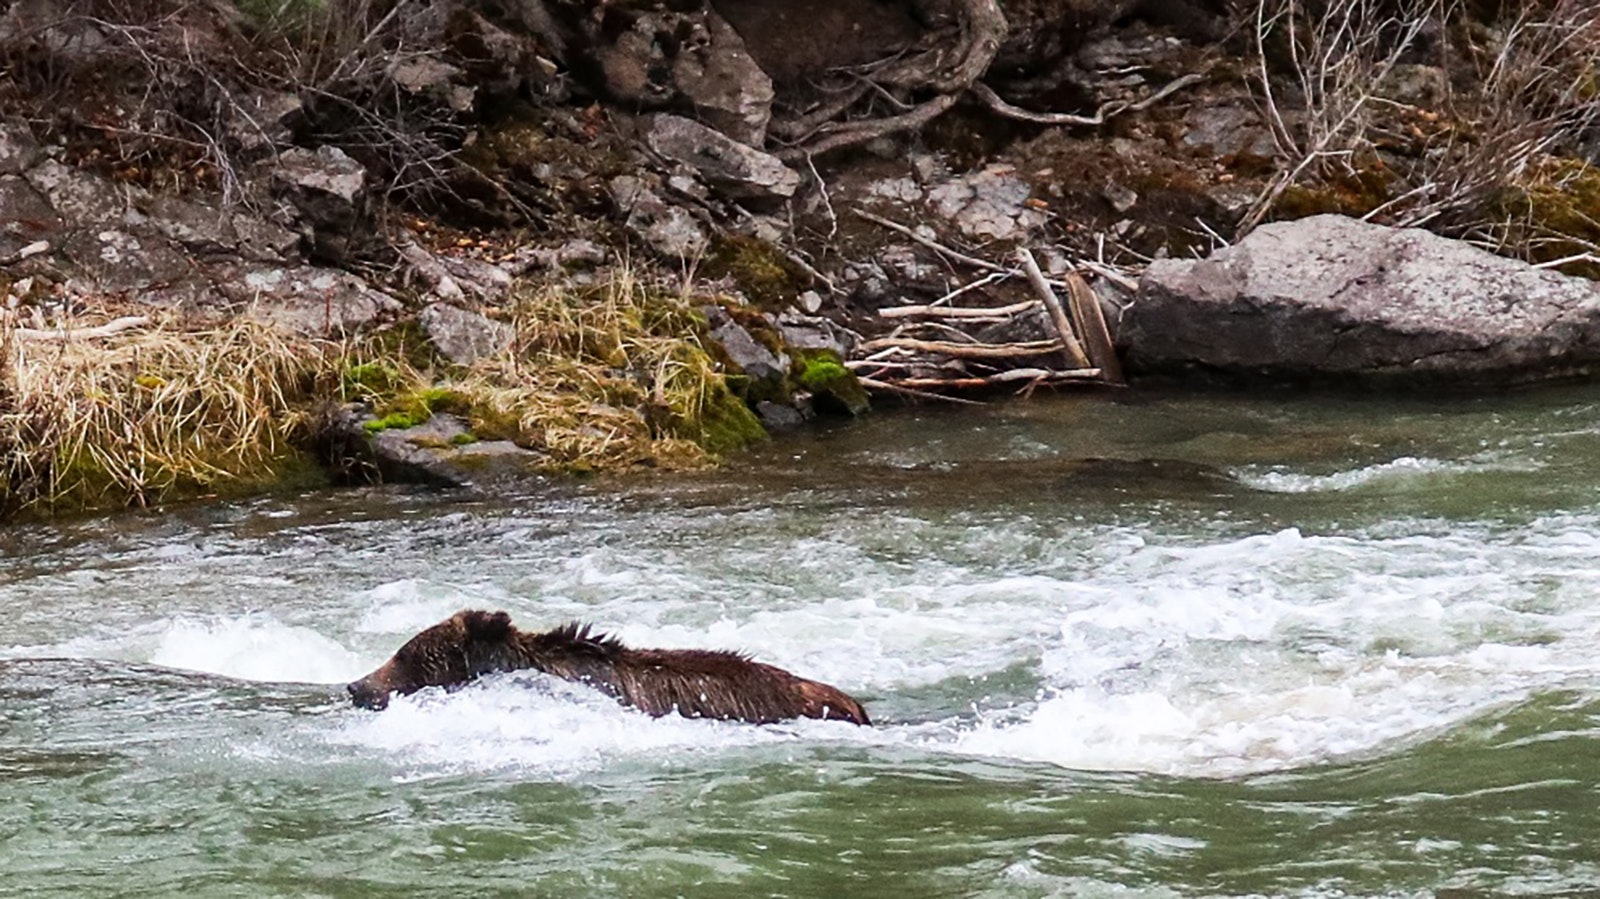 A young male grizzly bear swam upstream in the Hoback River near Pinedale, feasting on a large prey carcass in the middle of the river before returning to shore.